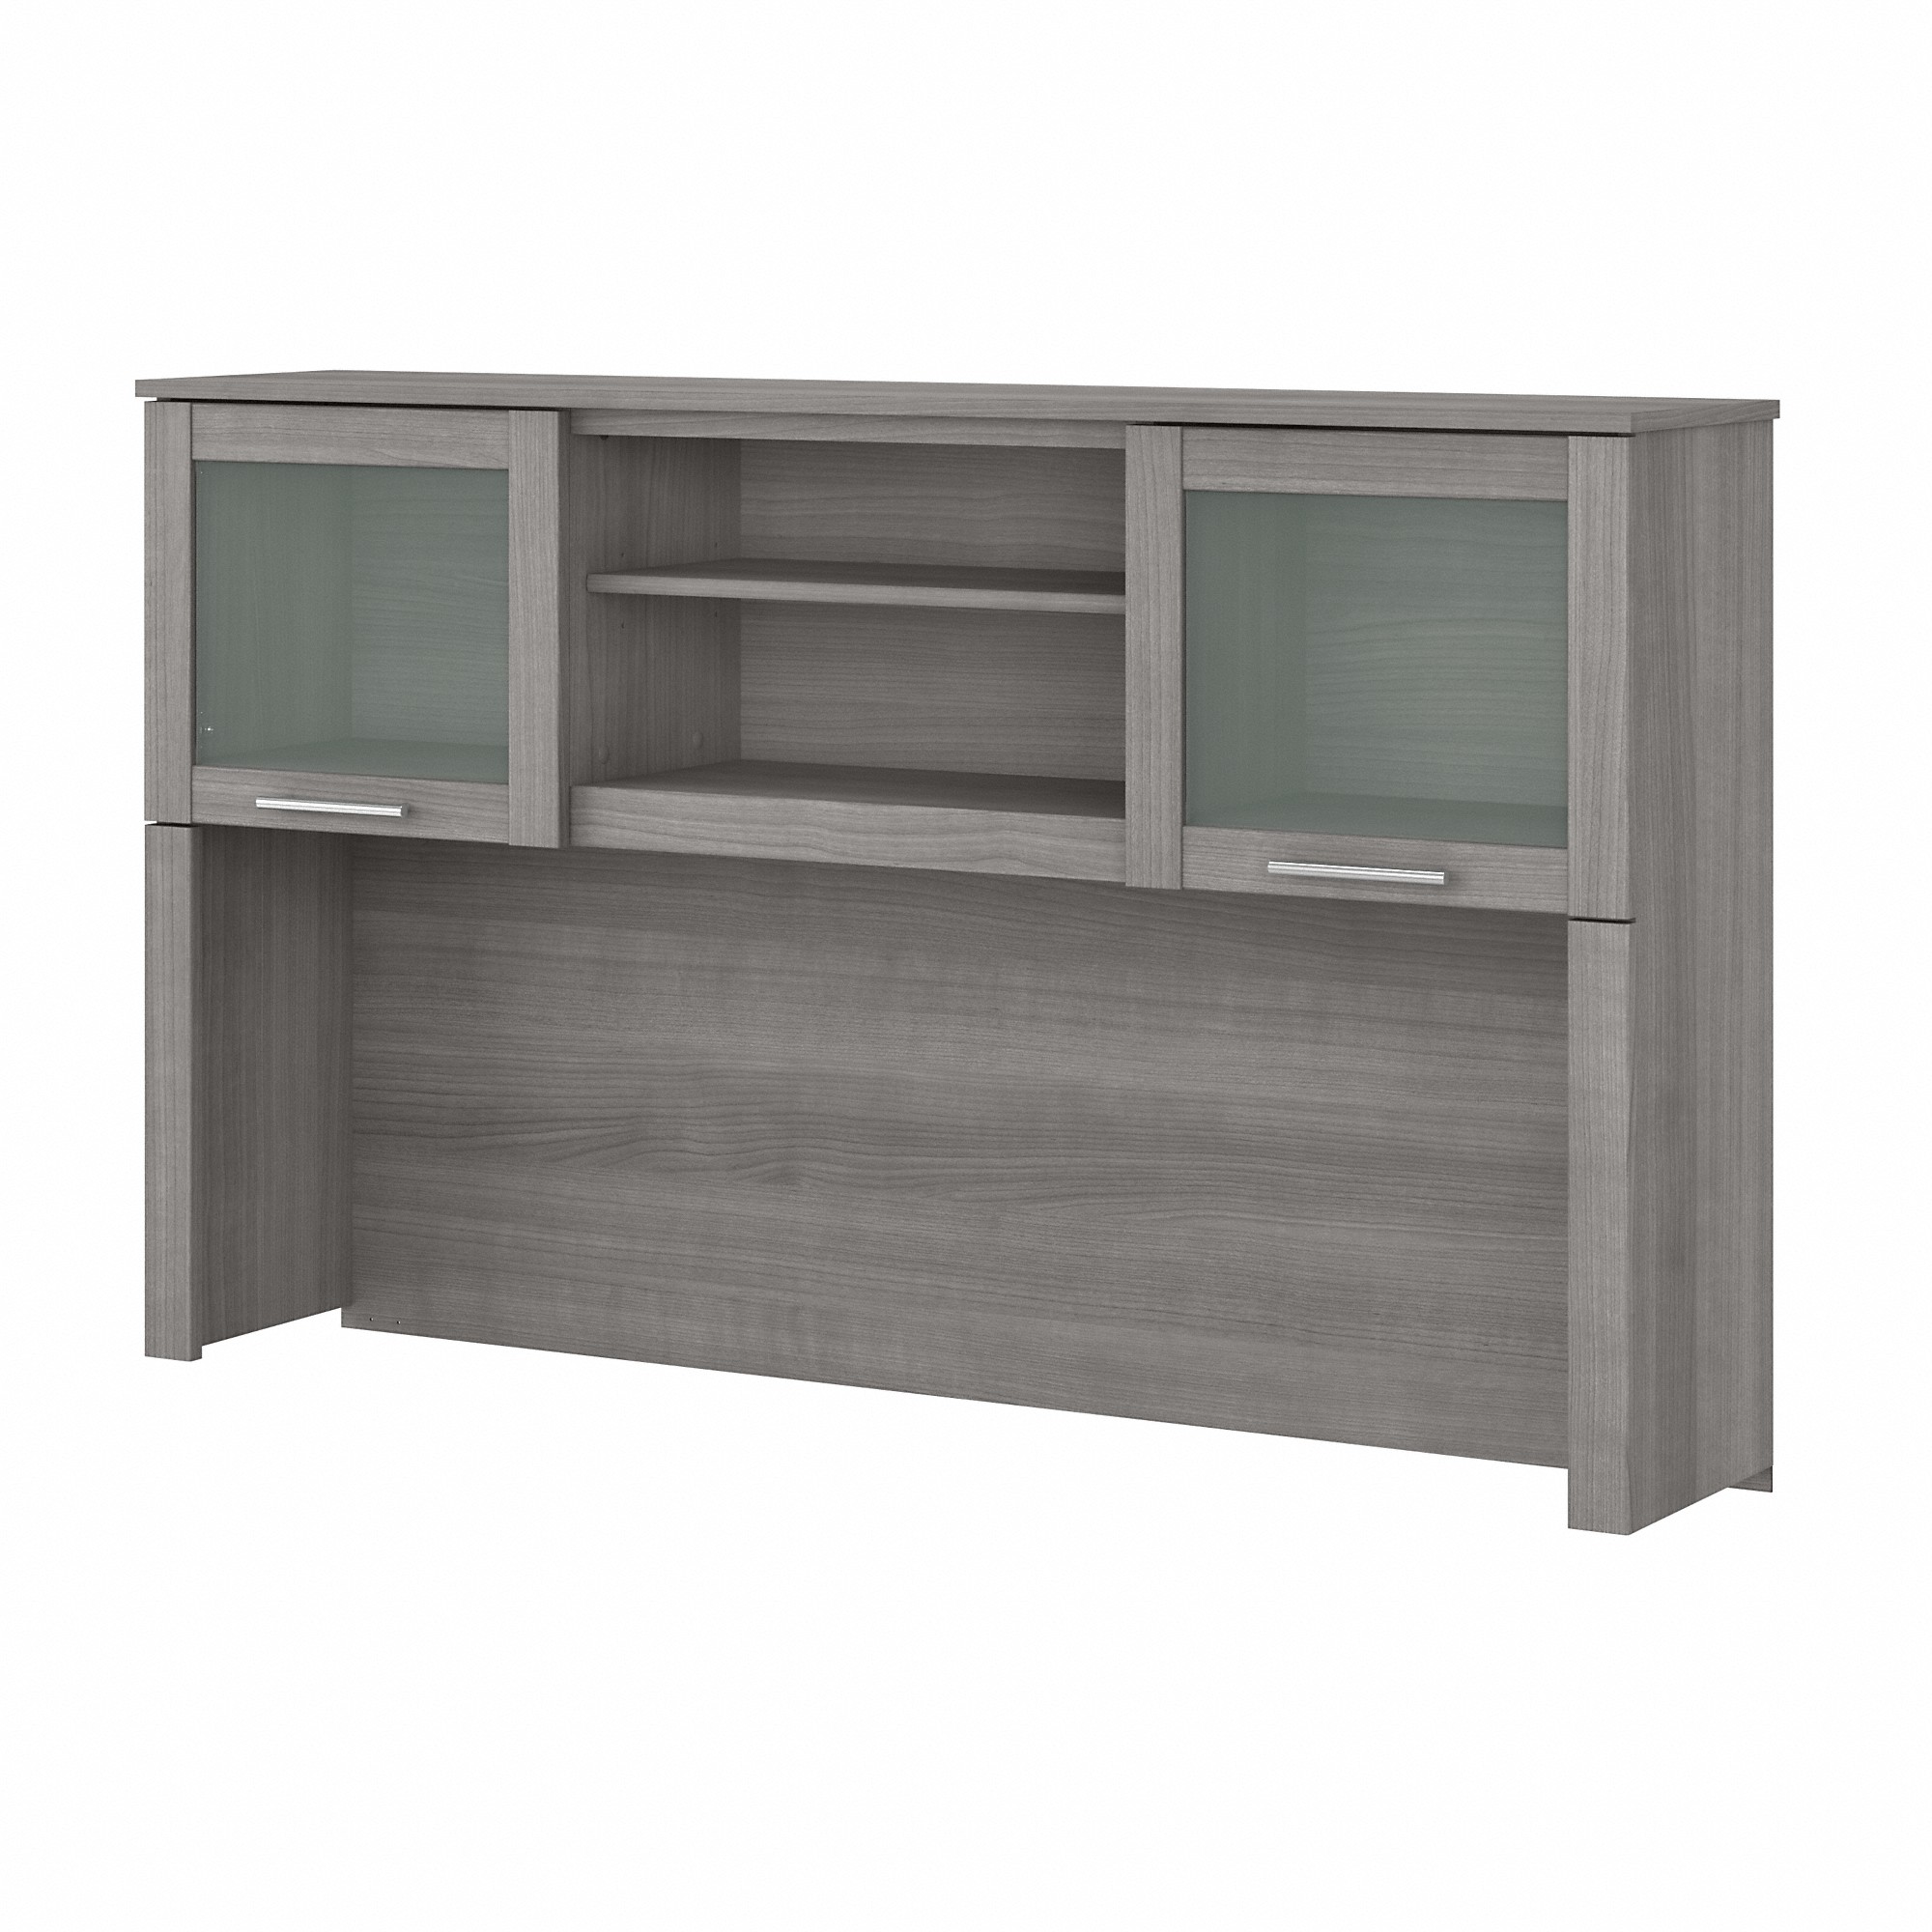 Bush Furniture Somerset 60 in 2-Door Hutch with Open Storage in Platinum Gray - fits on Somerset 60 in L Desk (Sold Separately) - image 1 of 8